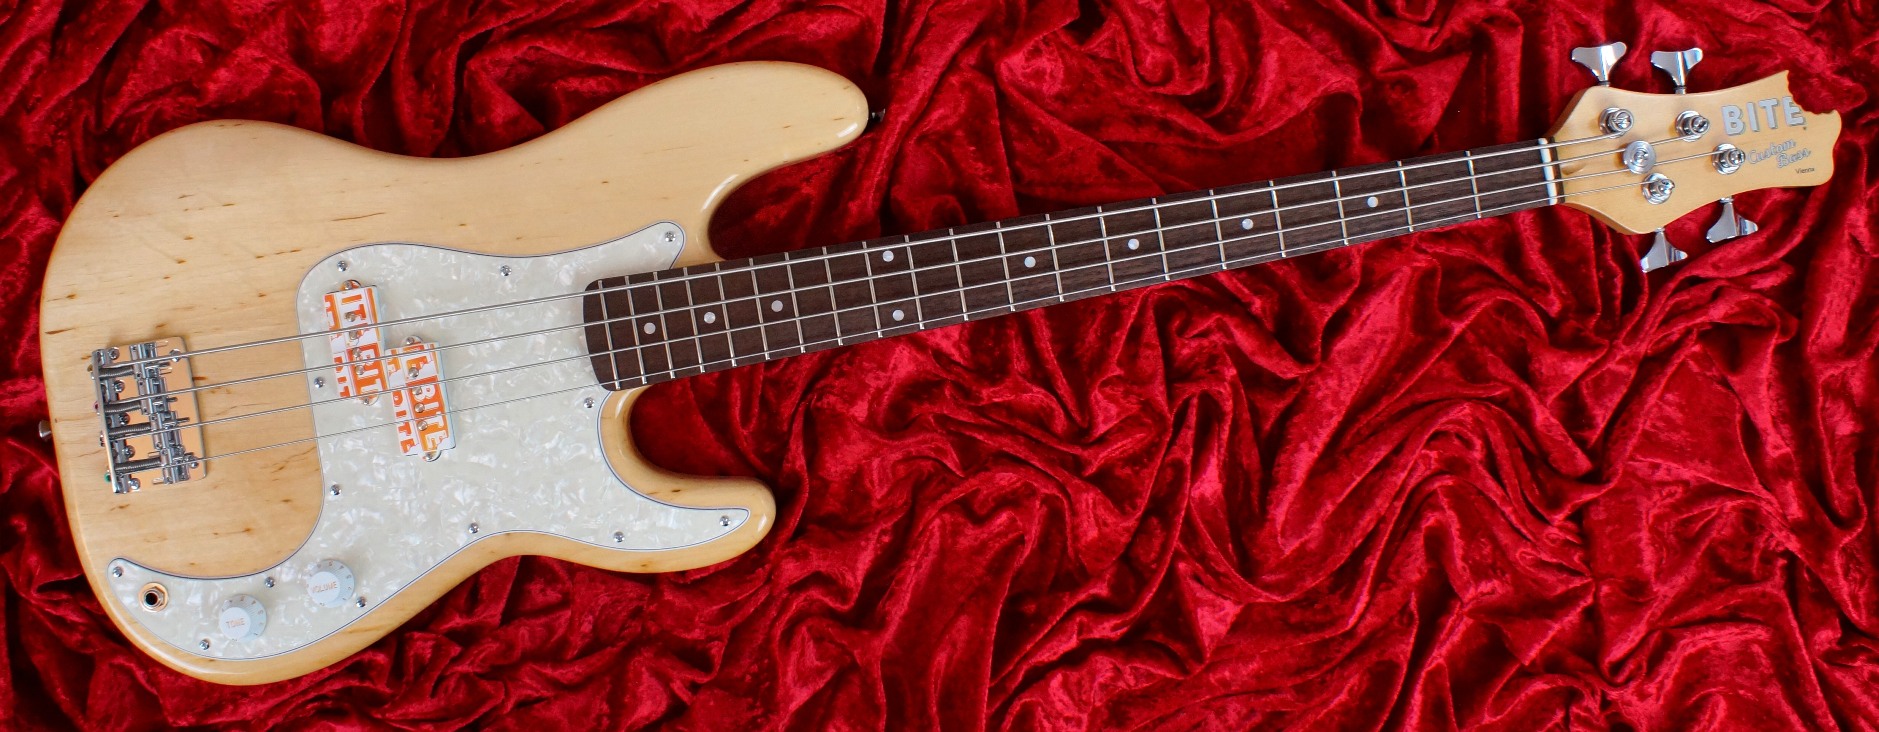 review bite bass